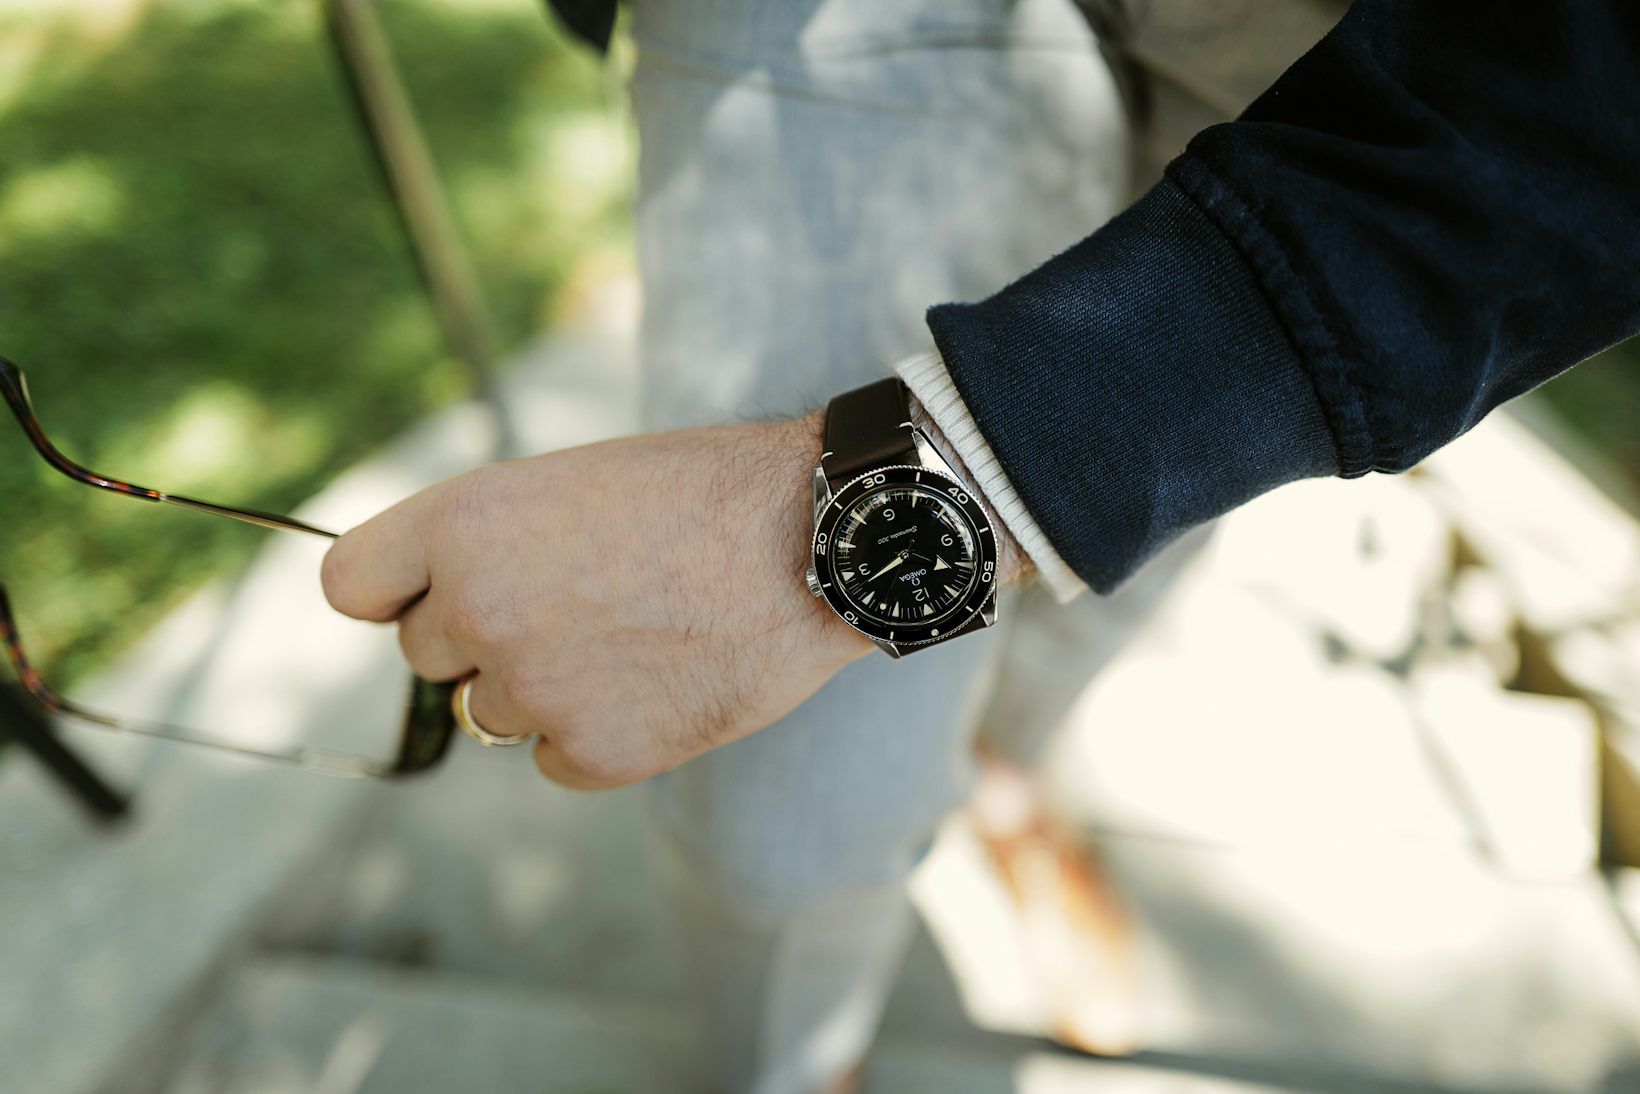 Why should you wear your watch on the left wrist? Here's the